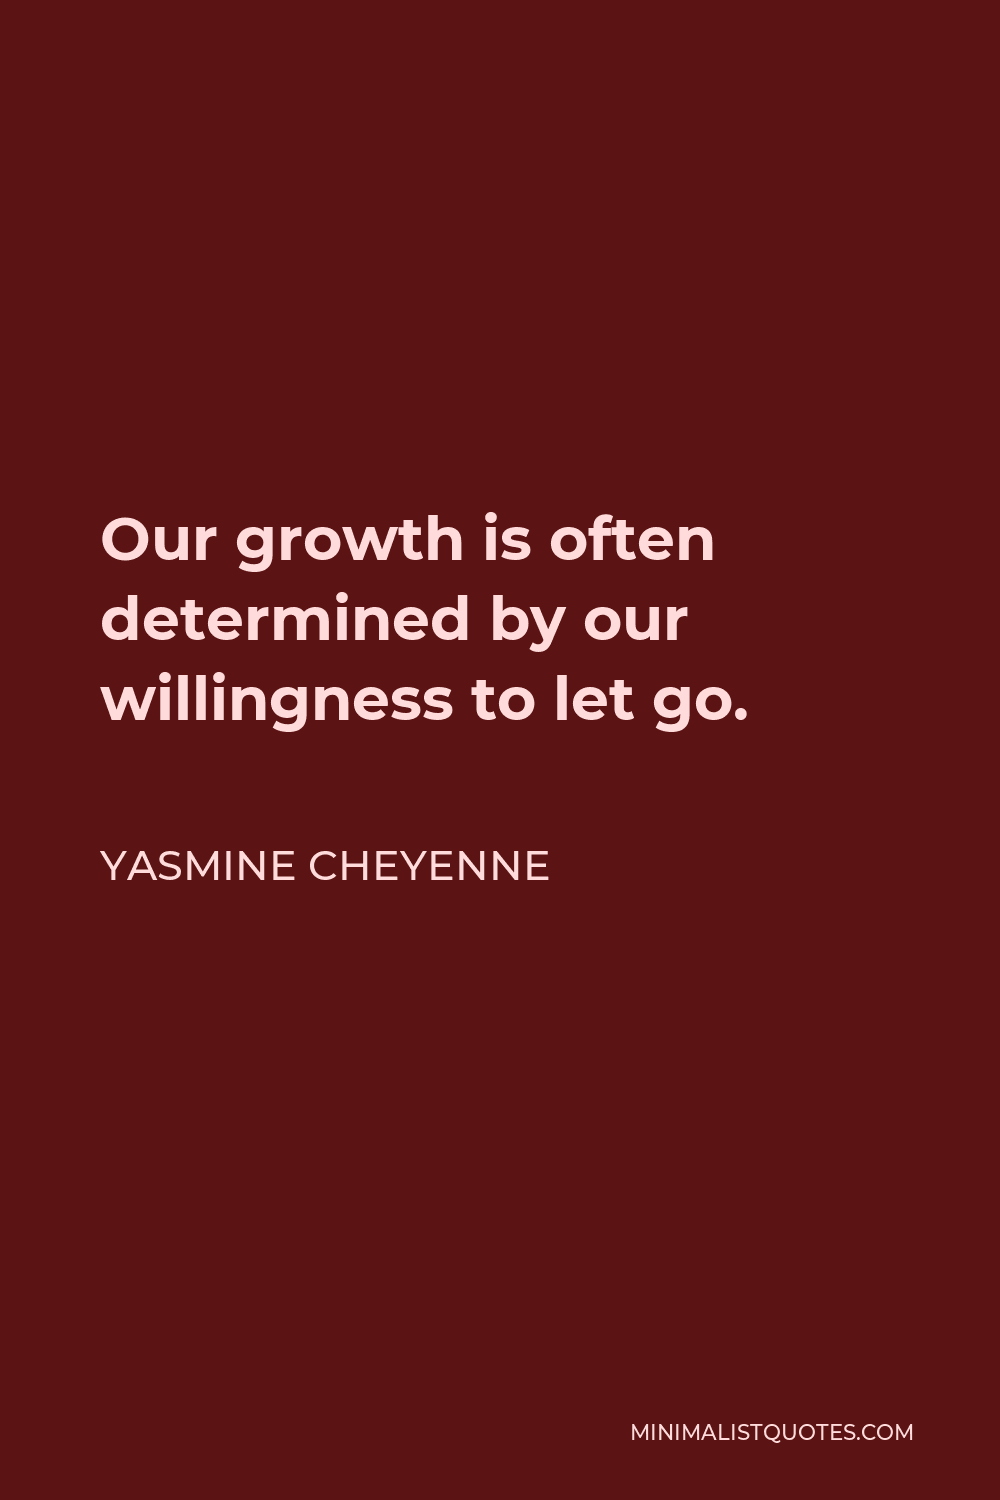 Yasmine Cheyenne Quote - Our growth is often determined by our willingness to let go.